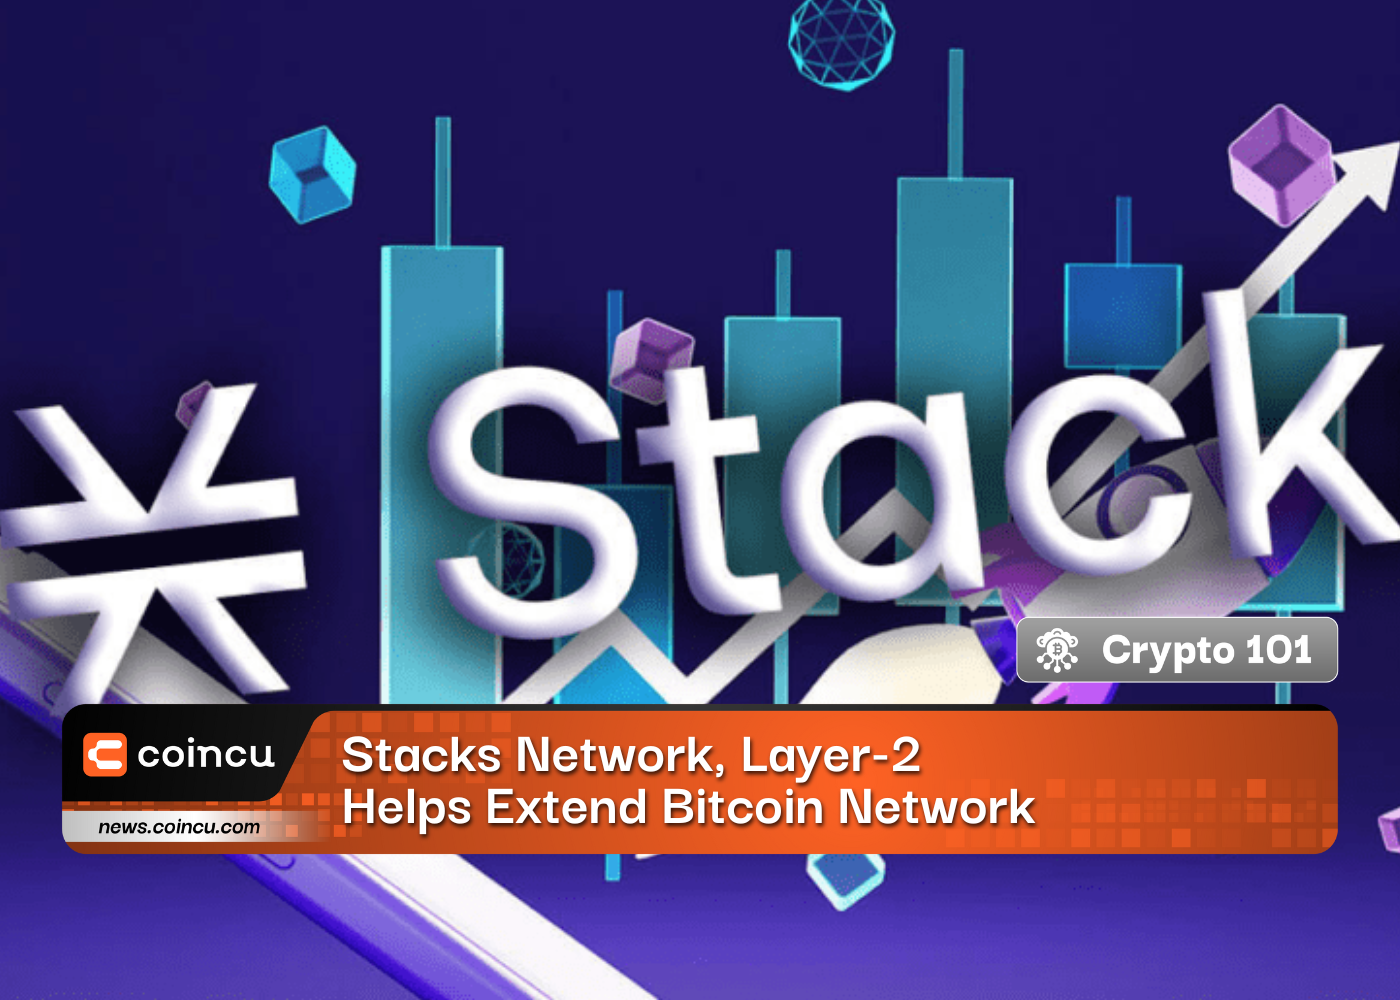 Stacks Network, Layer-2 Helps Extend Bitcoin Network